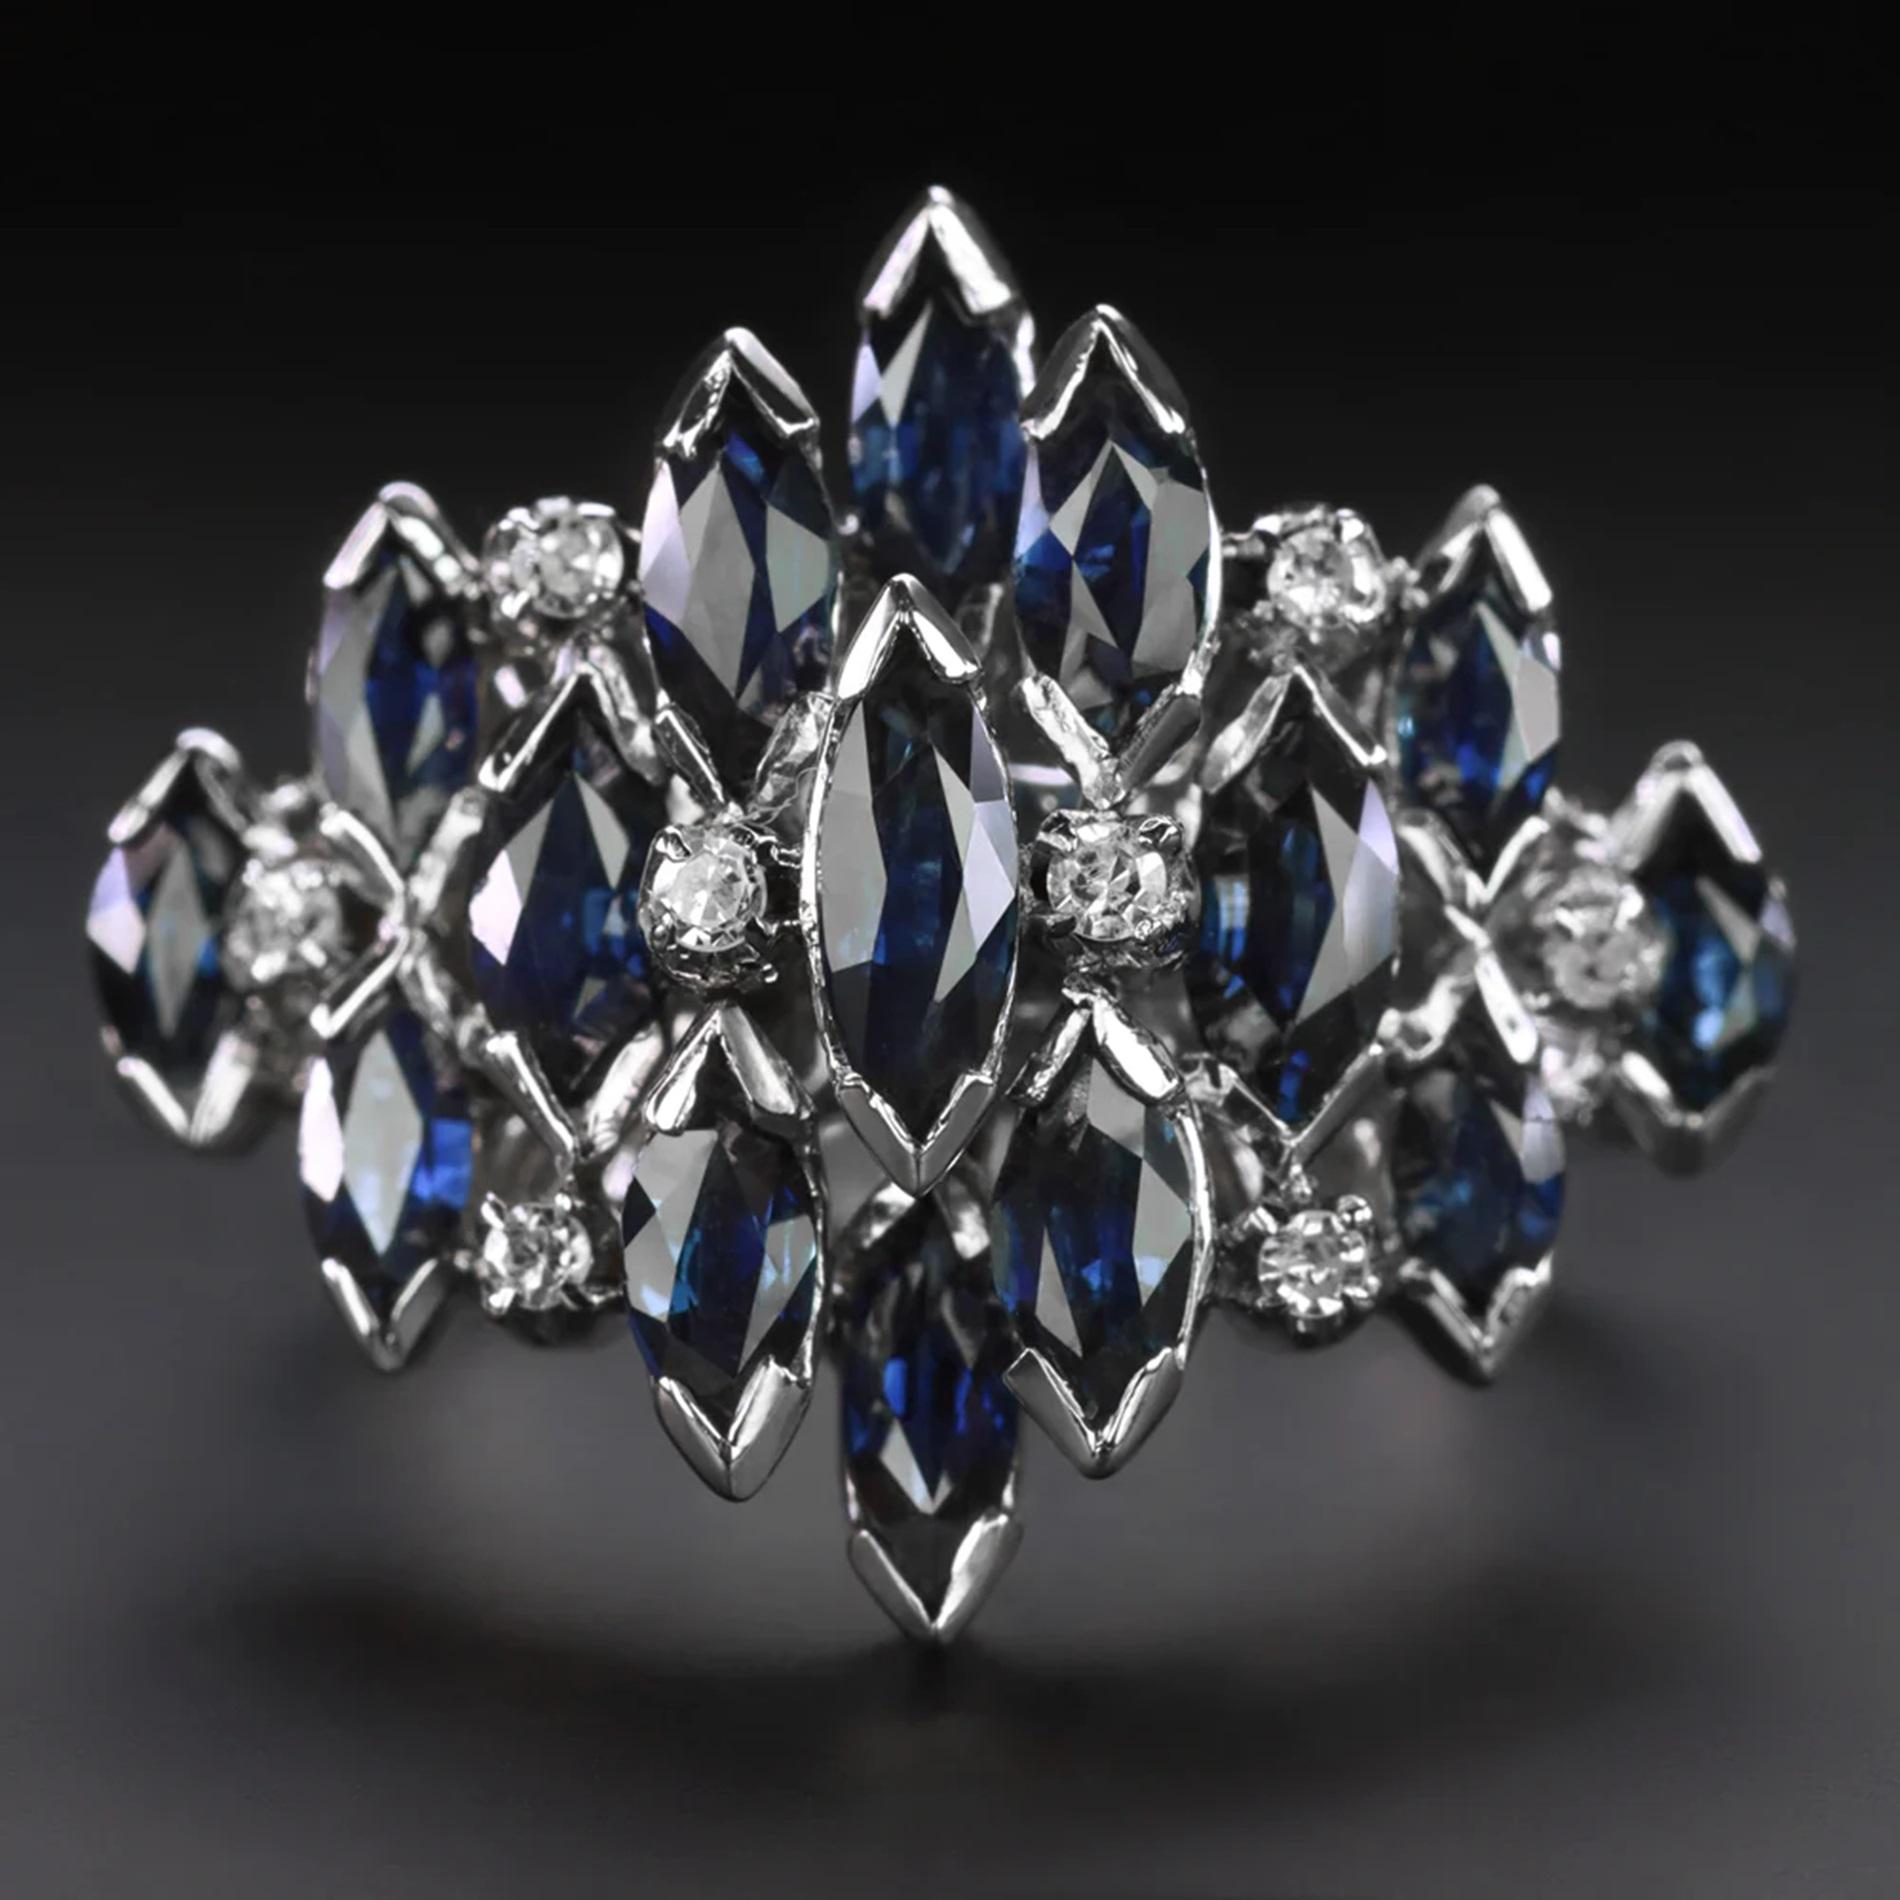 This vintage sapphire and diamond ring has a unique and elegant design with a bold cluster of sapphires interspersed with glittering diamonds.

Highlights:

- Original vintage

- 3 carats of rich blue natural sapphires

- Gorgeous color that’s very